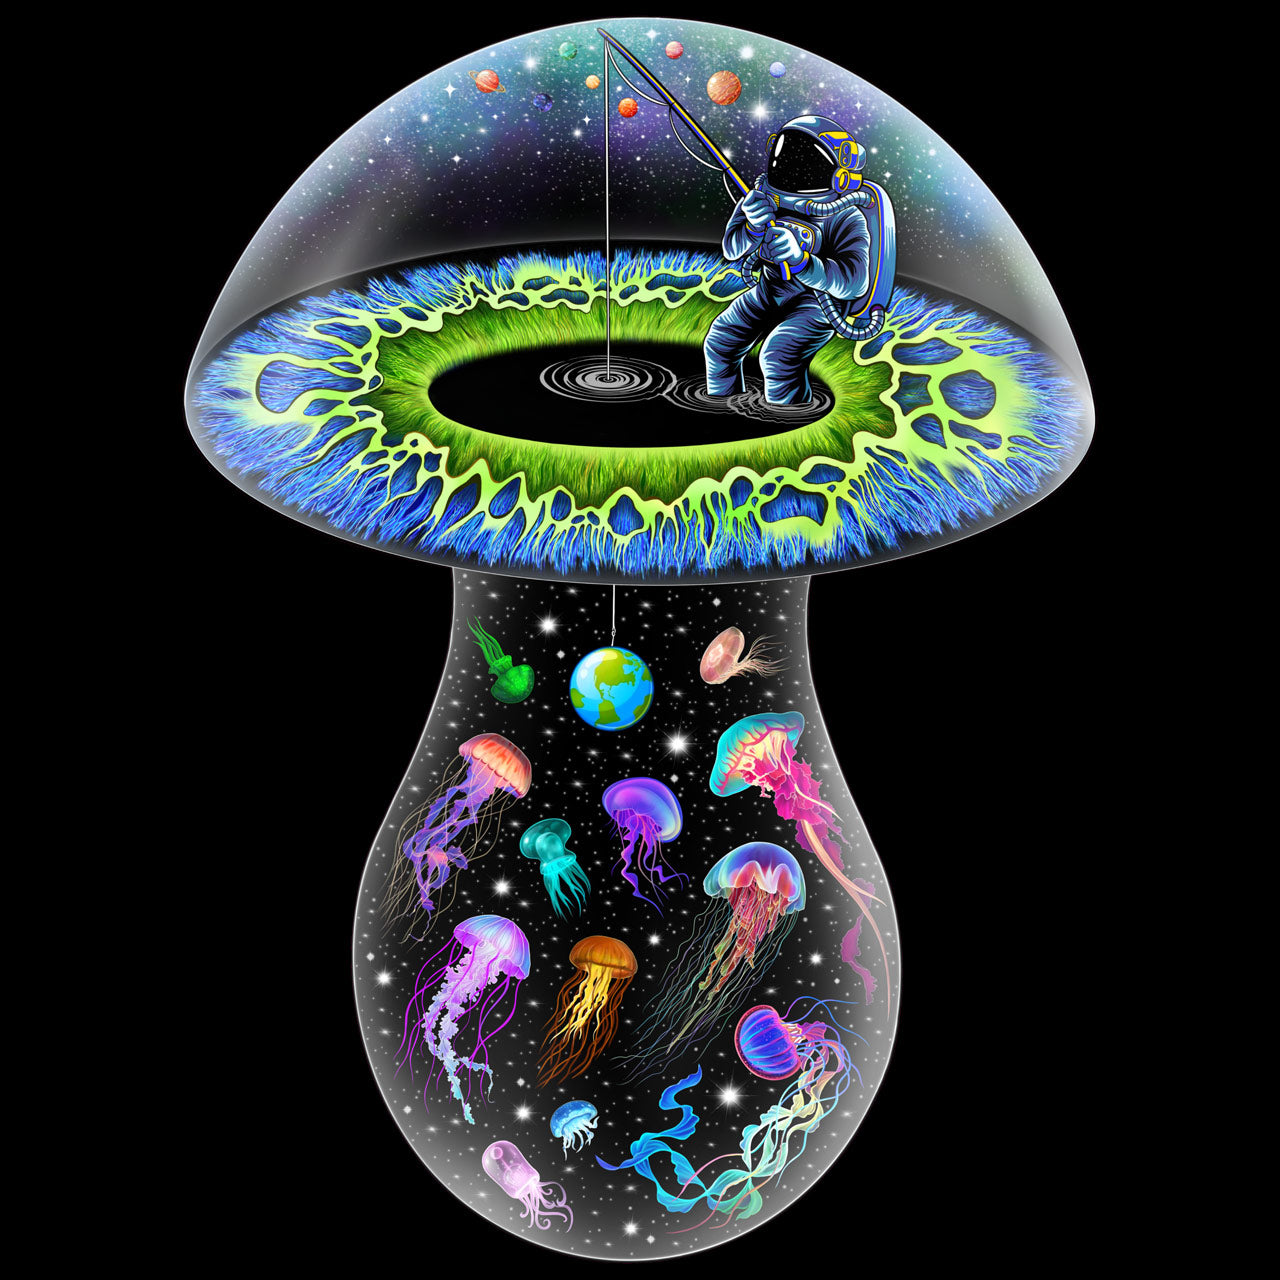 Trippin on Space Mushrooms |Shroomaniac| Psychedelic and Psytrance Mushroom T-Shirt